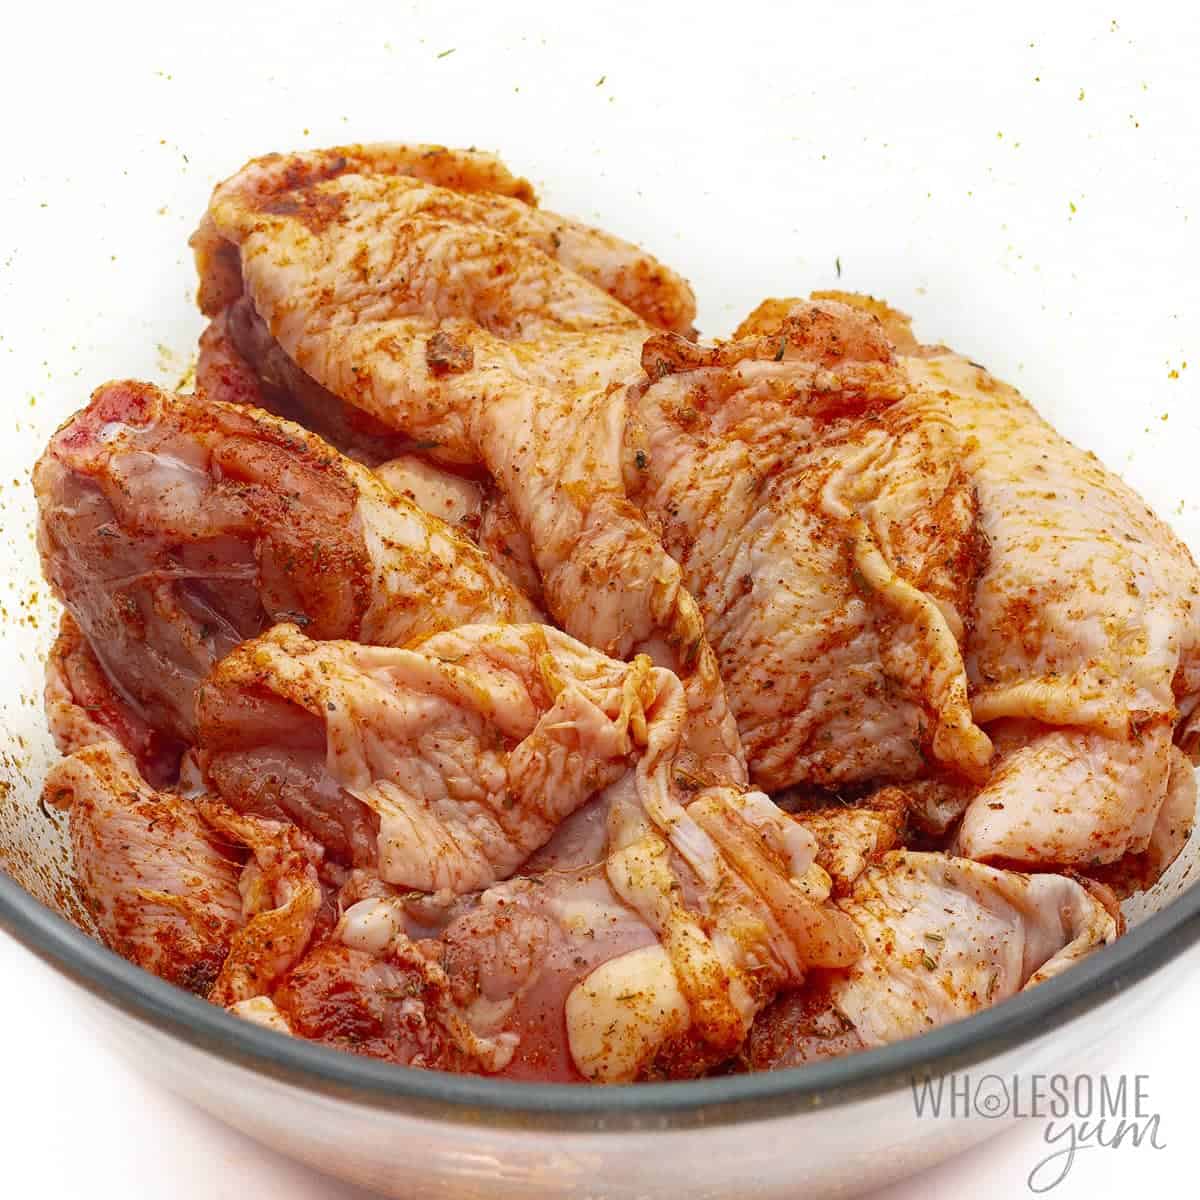 Chicken with seasonings coating the skin in a glass bowl.